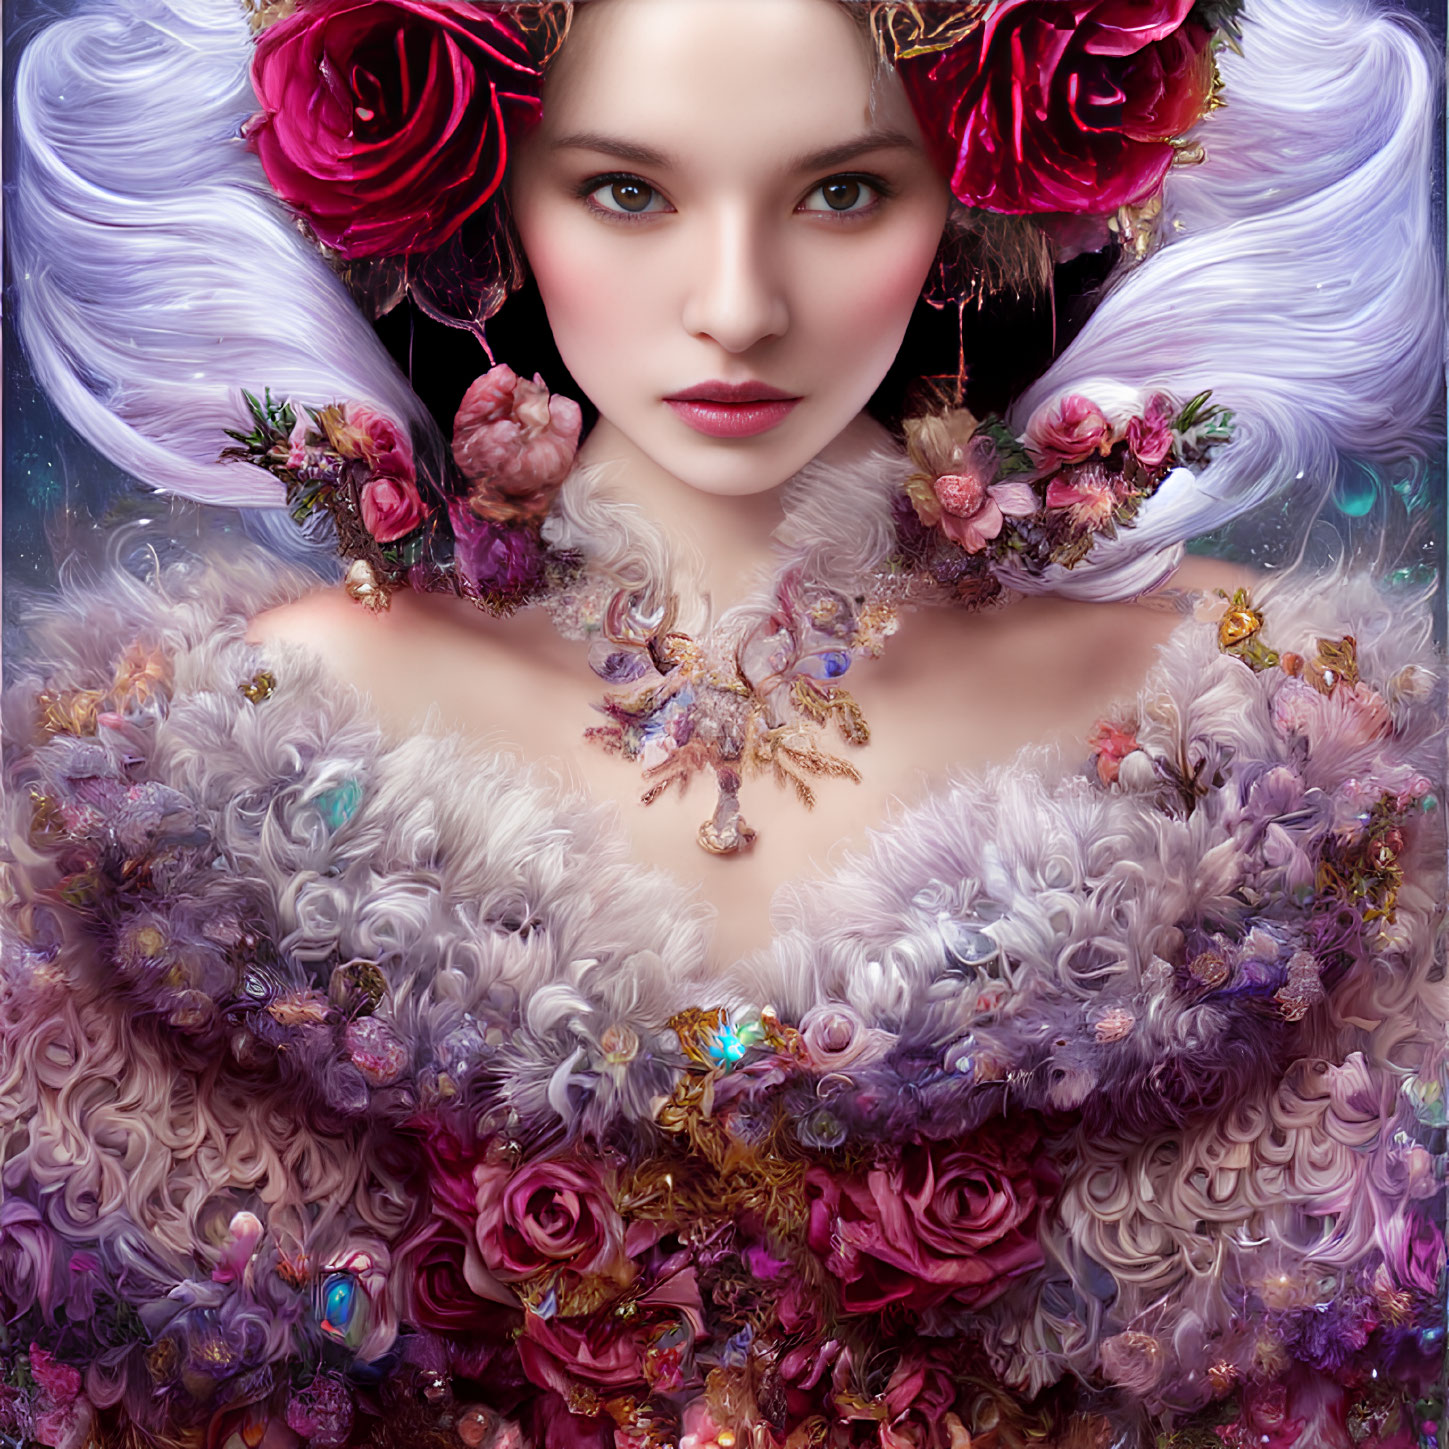 Porcelain-skinned woman surrounded by lush flowers and intricate jewelry